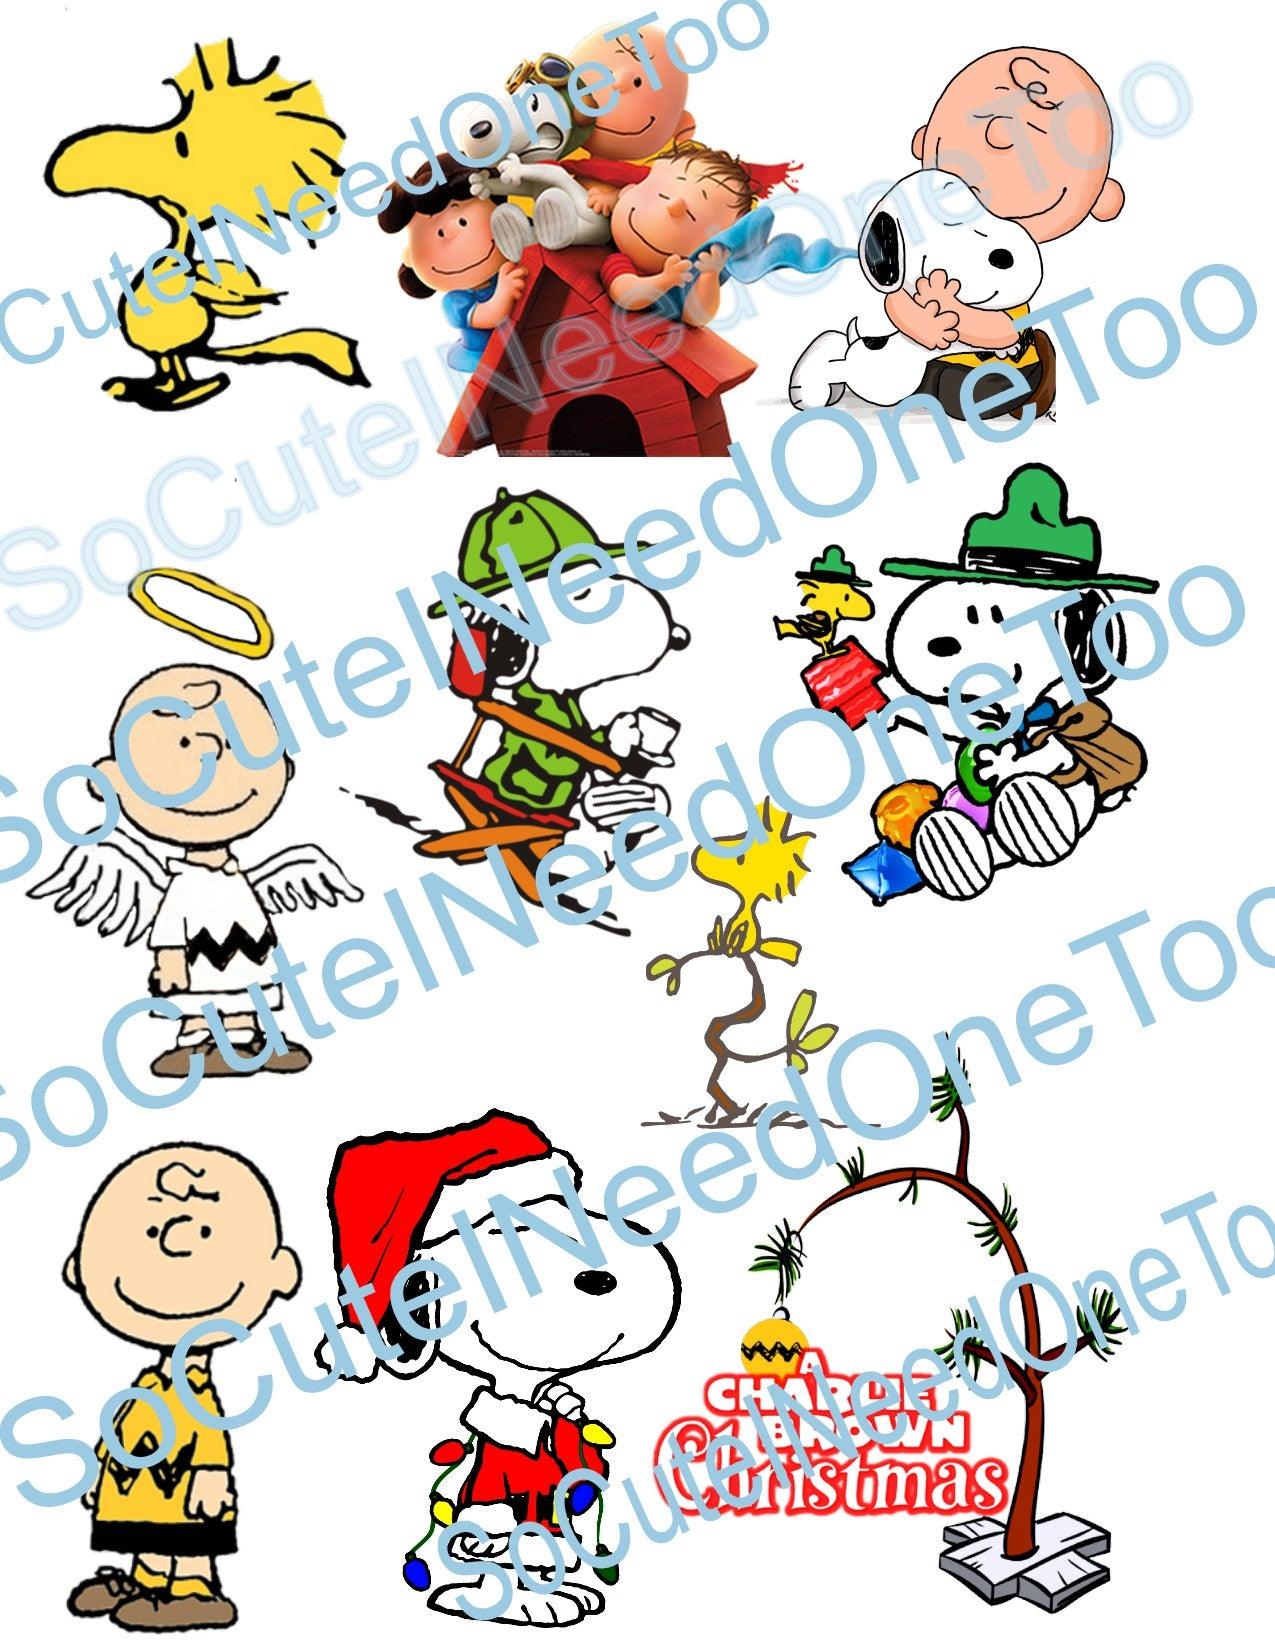 SNOOPY COLLECTION on Clear/White Waterslide Paper - Ready To Use - SoCuteINeedOneToo